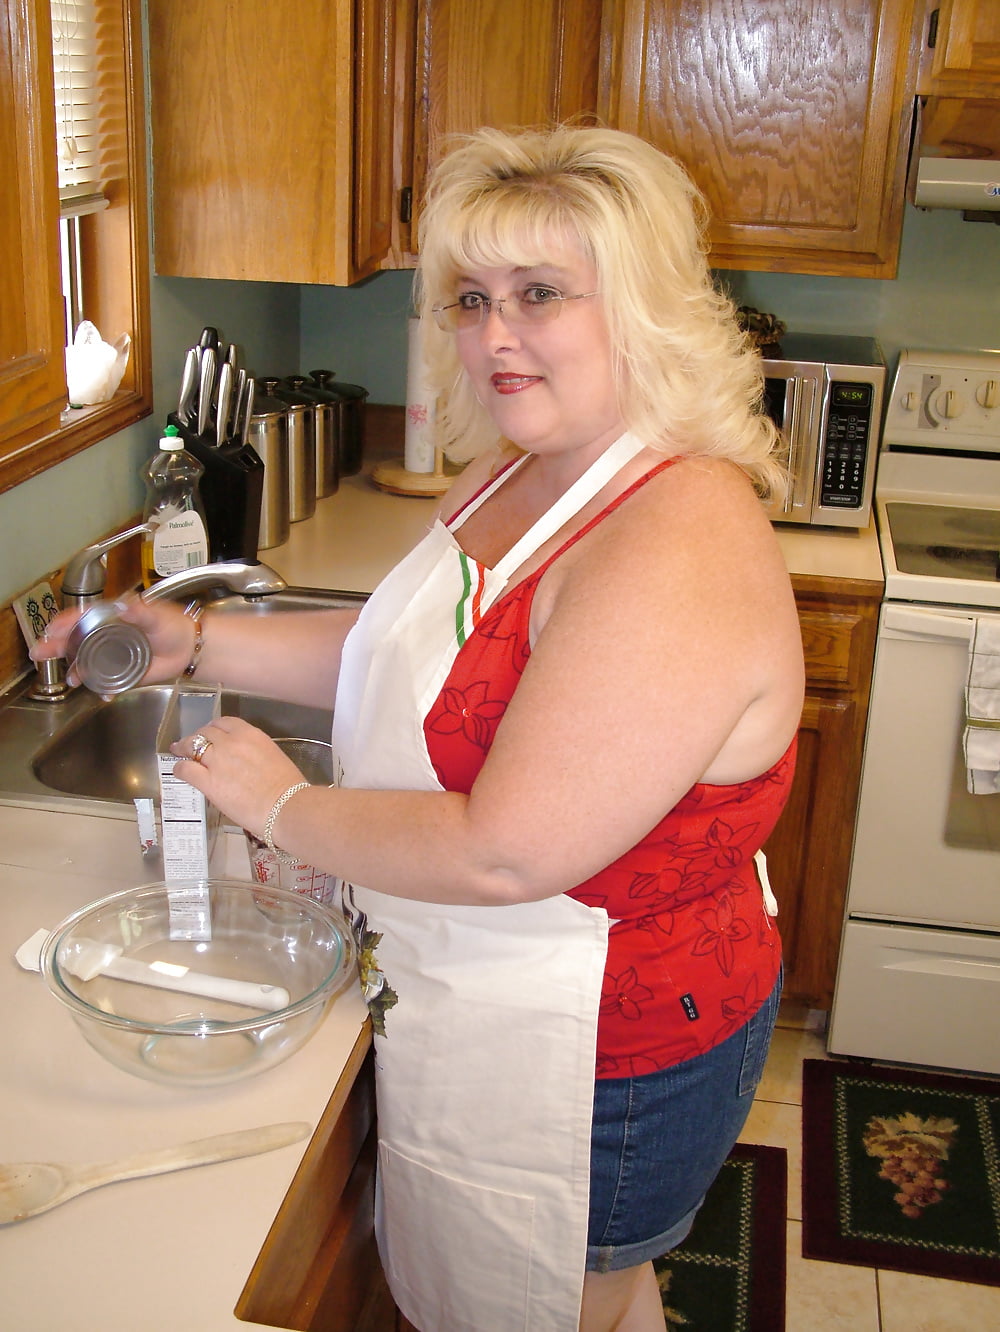 My Wife 70 Let s Make Muffins 2 - Photo #8 